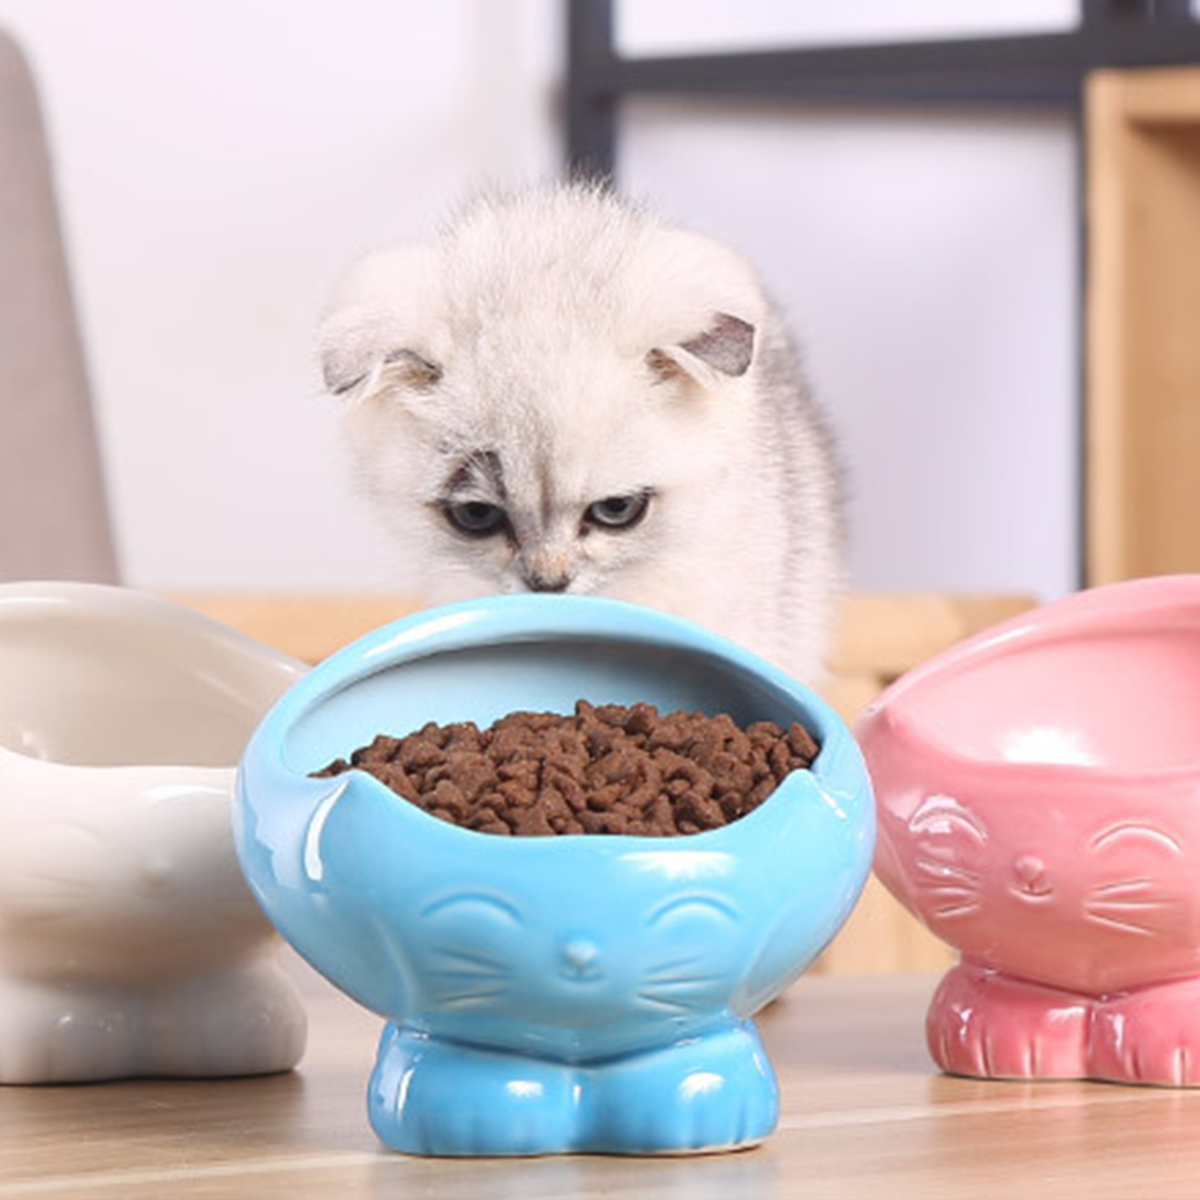 Cats-Feeding-Pet-Bowl-Food-Ceramic-Bowl-Puppy-Dogs-Snack-Water-Feeder-1691894-6